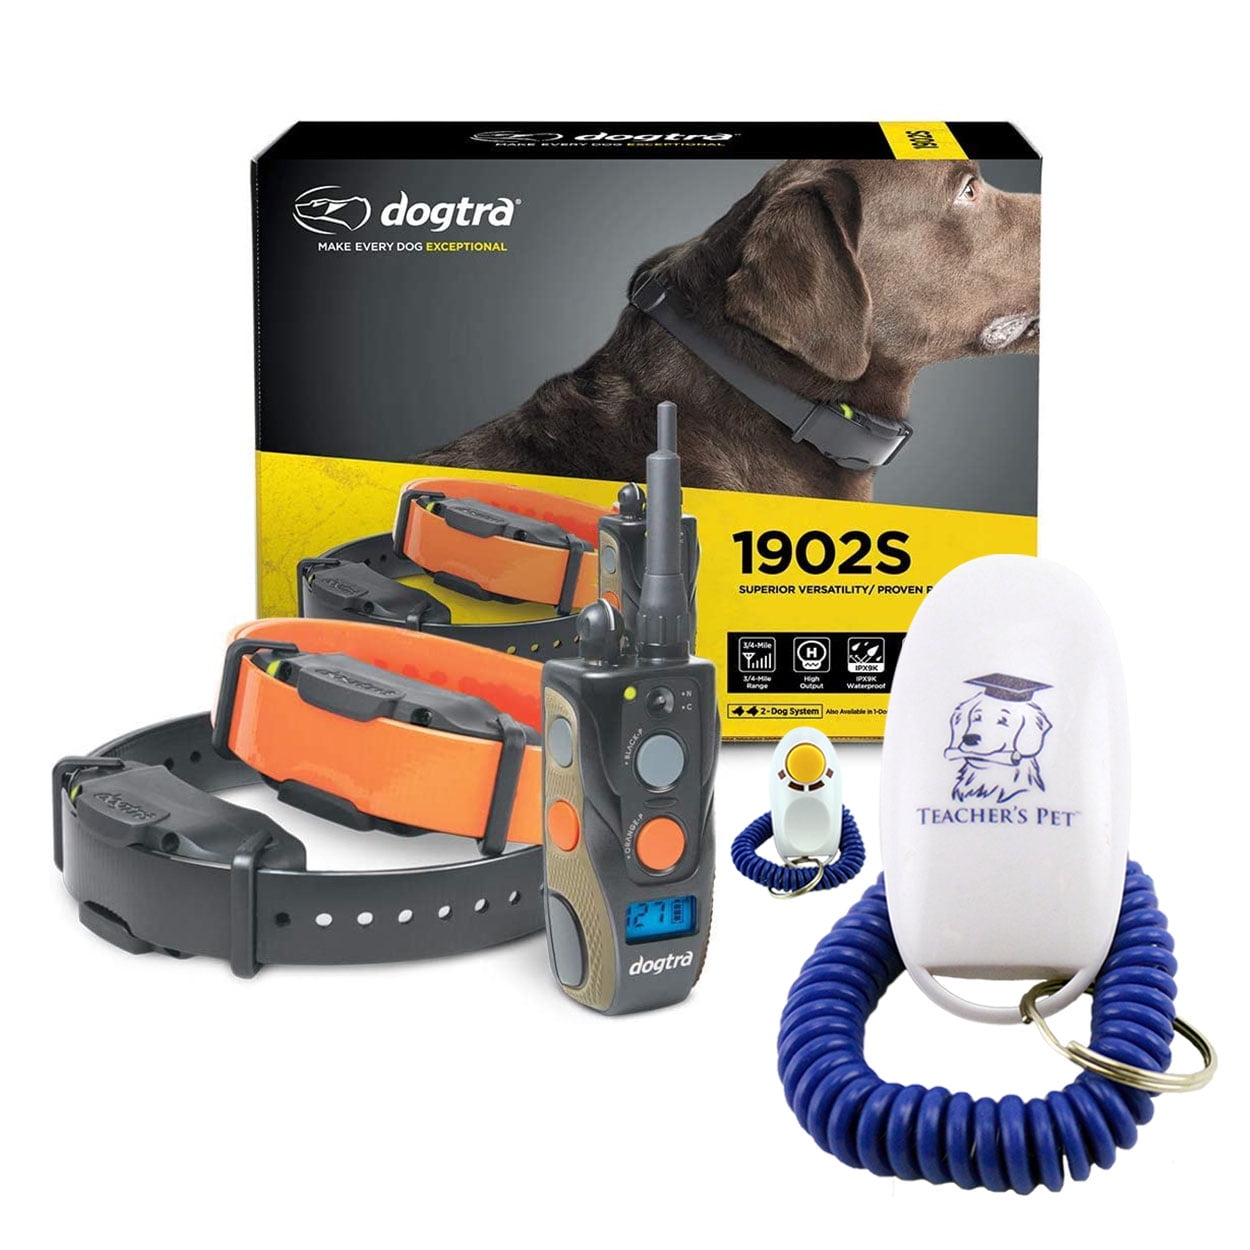 Dogtra ARC Slim Ergonomic 3/4-Mile Remote Dog Training E-Collar with 127-Level Precise Control via LCD Screen with Teachers Pet Dog Training Clicker for Positive Reinforcement 